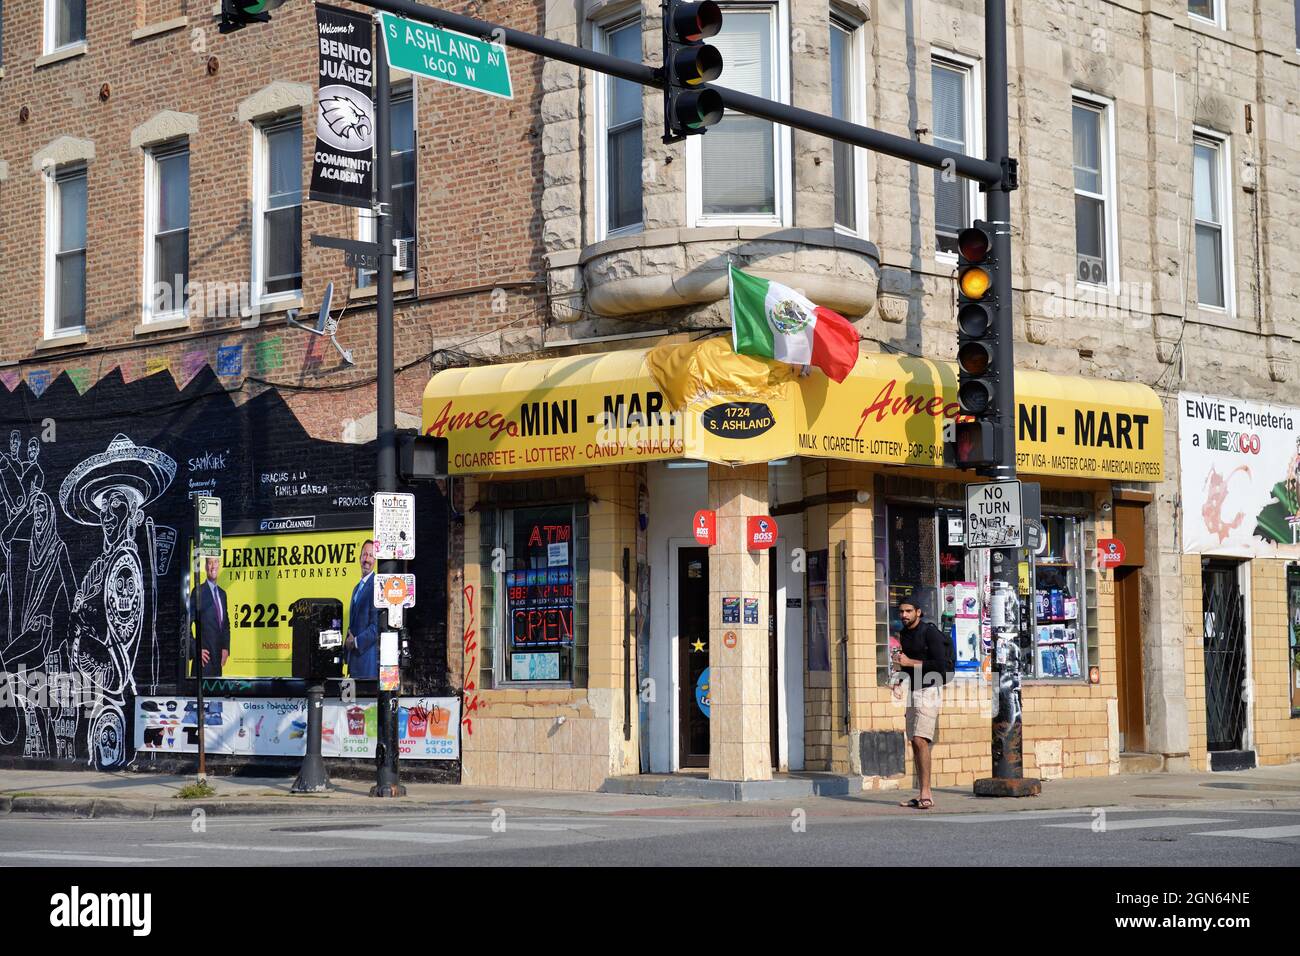 Chicago, Illinois, USA. A colorful mini-mart located in Chicago's Pilsen neighborhood. Stock Photo